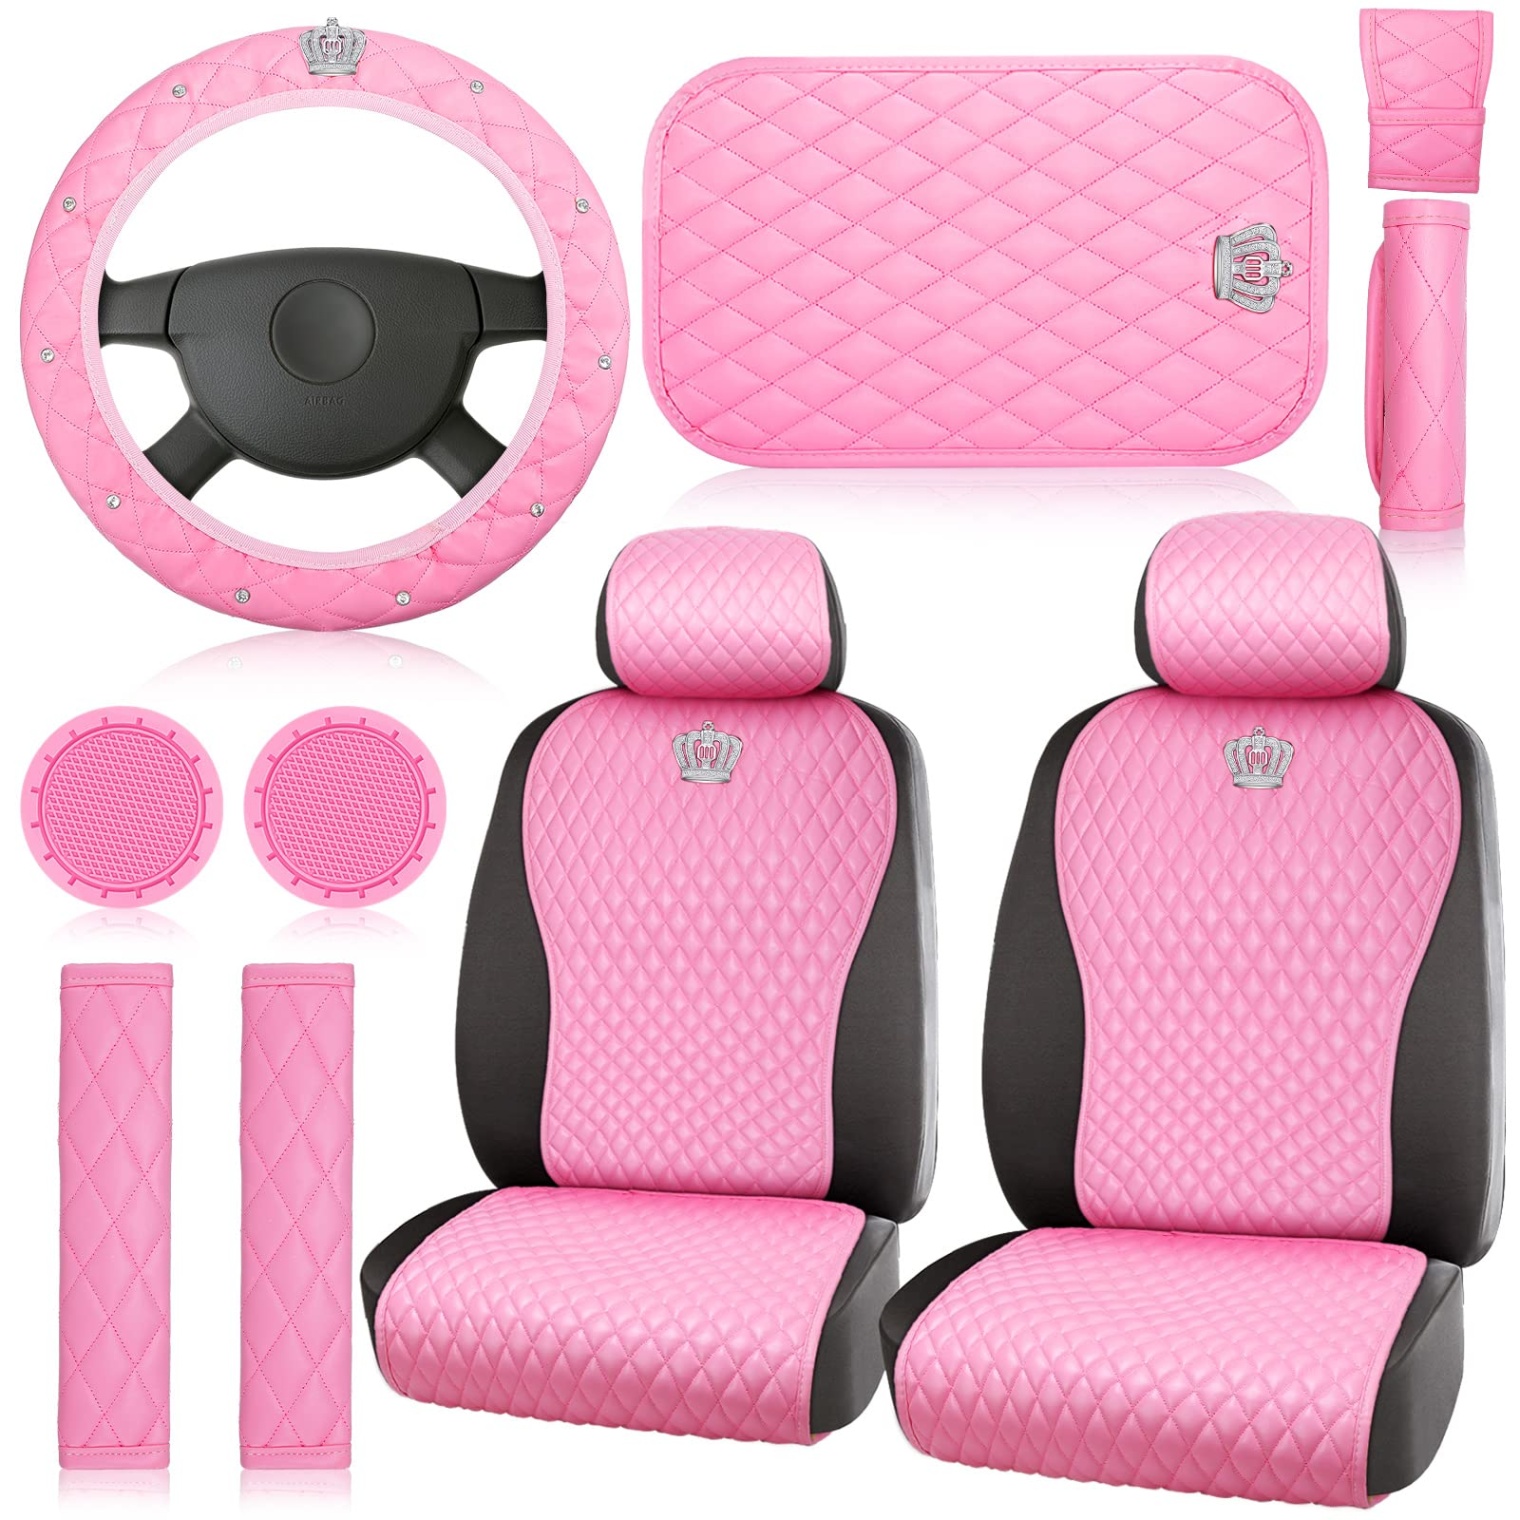 car seat accessories Niche Utama Home Pink Car Accessories Set Car Seat Covers Full Set Steering Wheel Cover  Headrest Cover with Center Console Pad Cup Holders Seat Belt Pads Gear  Cover